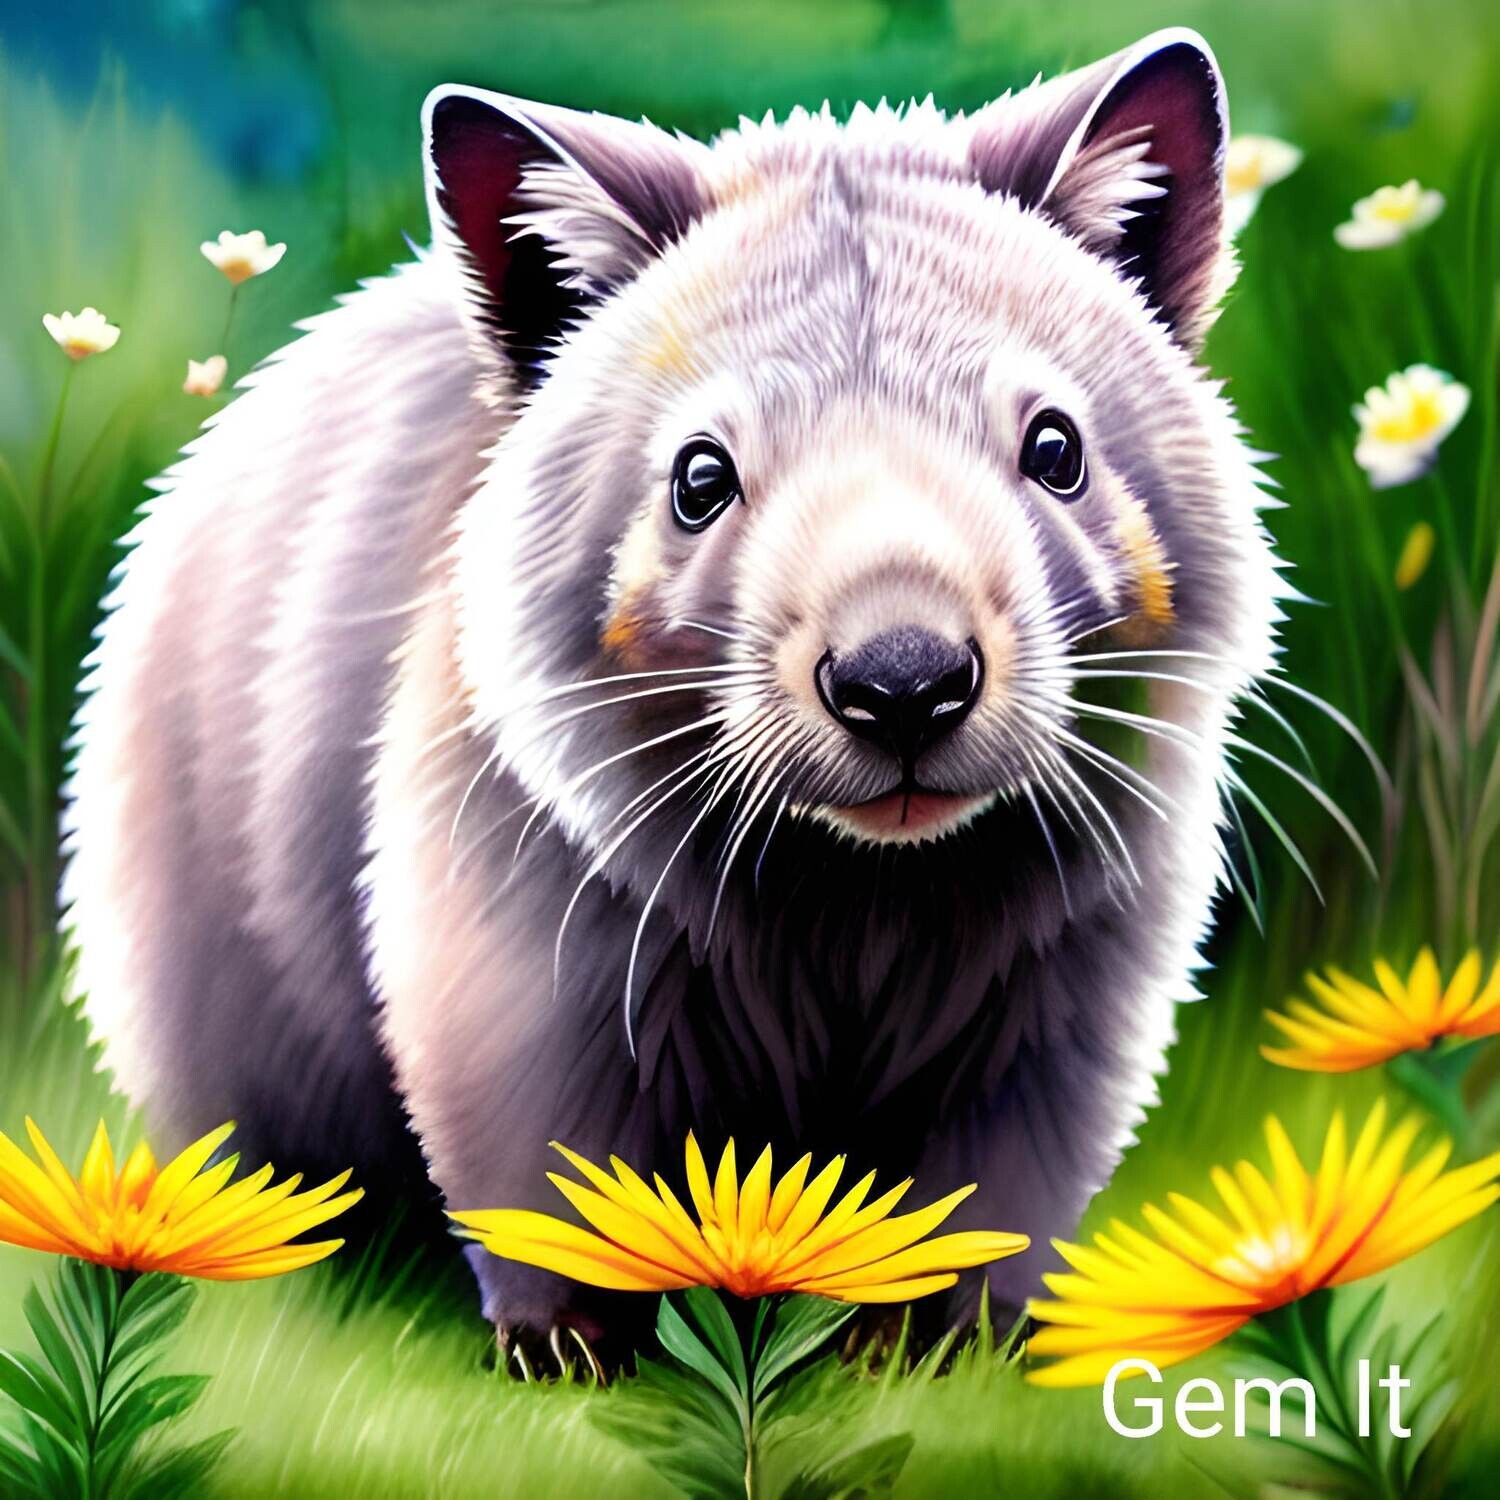 Wombat 1 - Full Drill Diamond Painting - Specially ordered for you. Delivery is approximately 4 - 6 weeks.